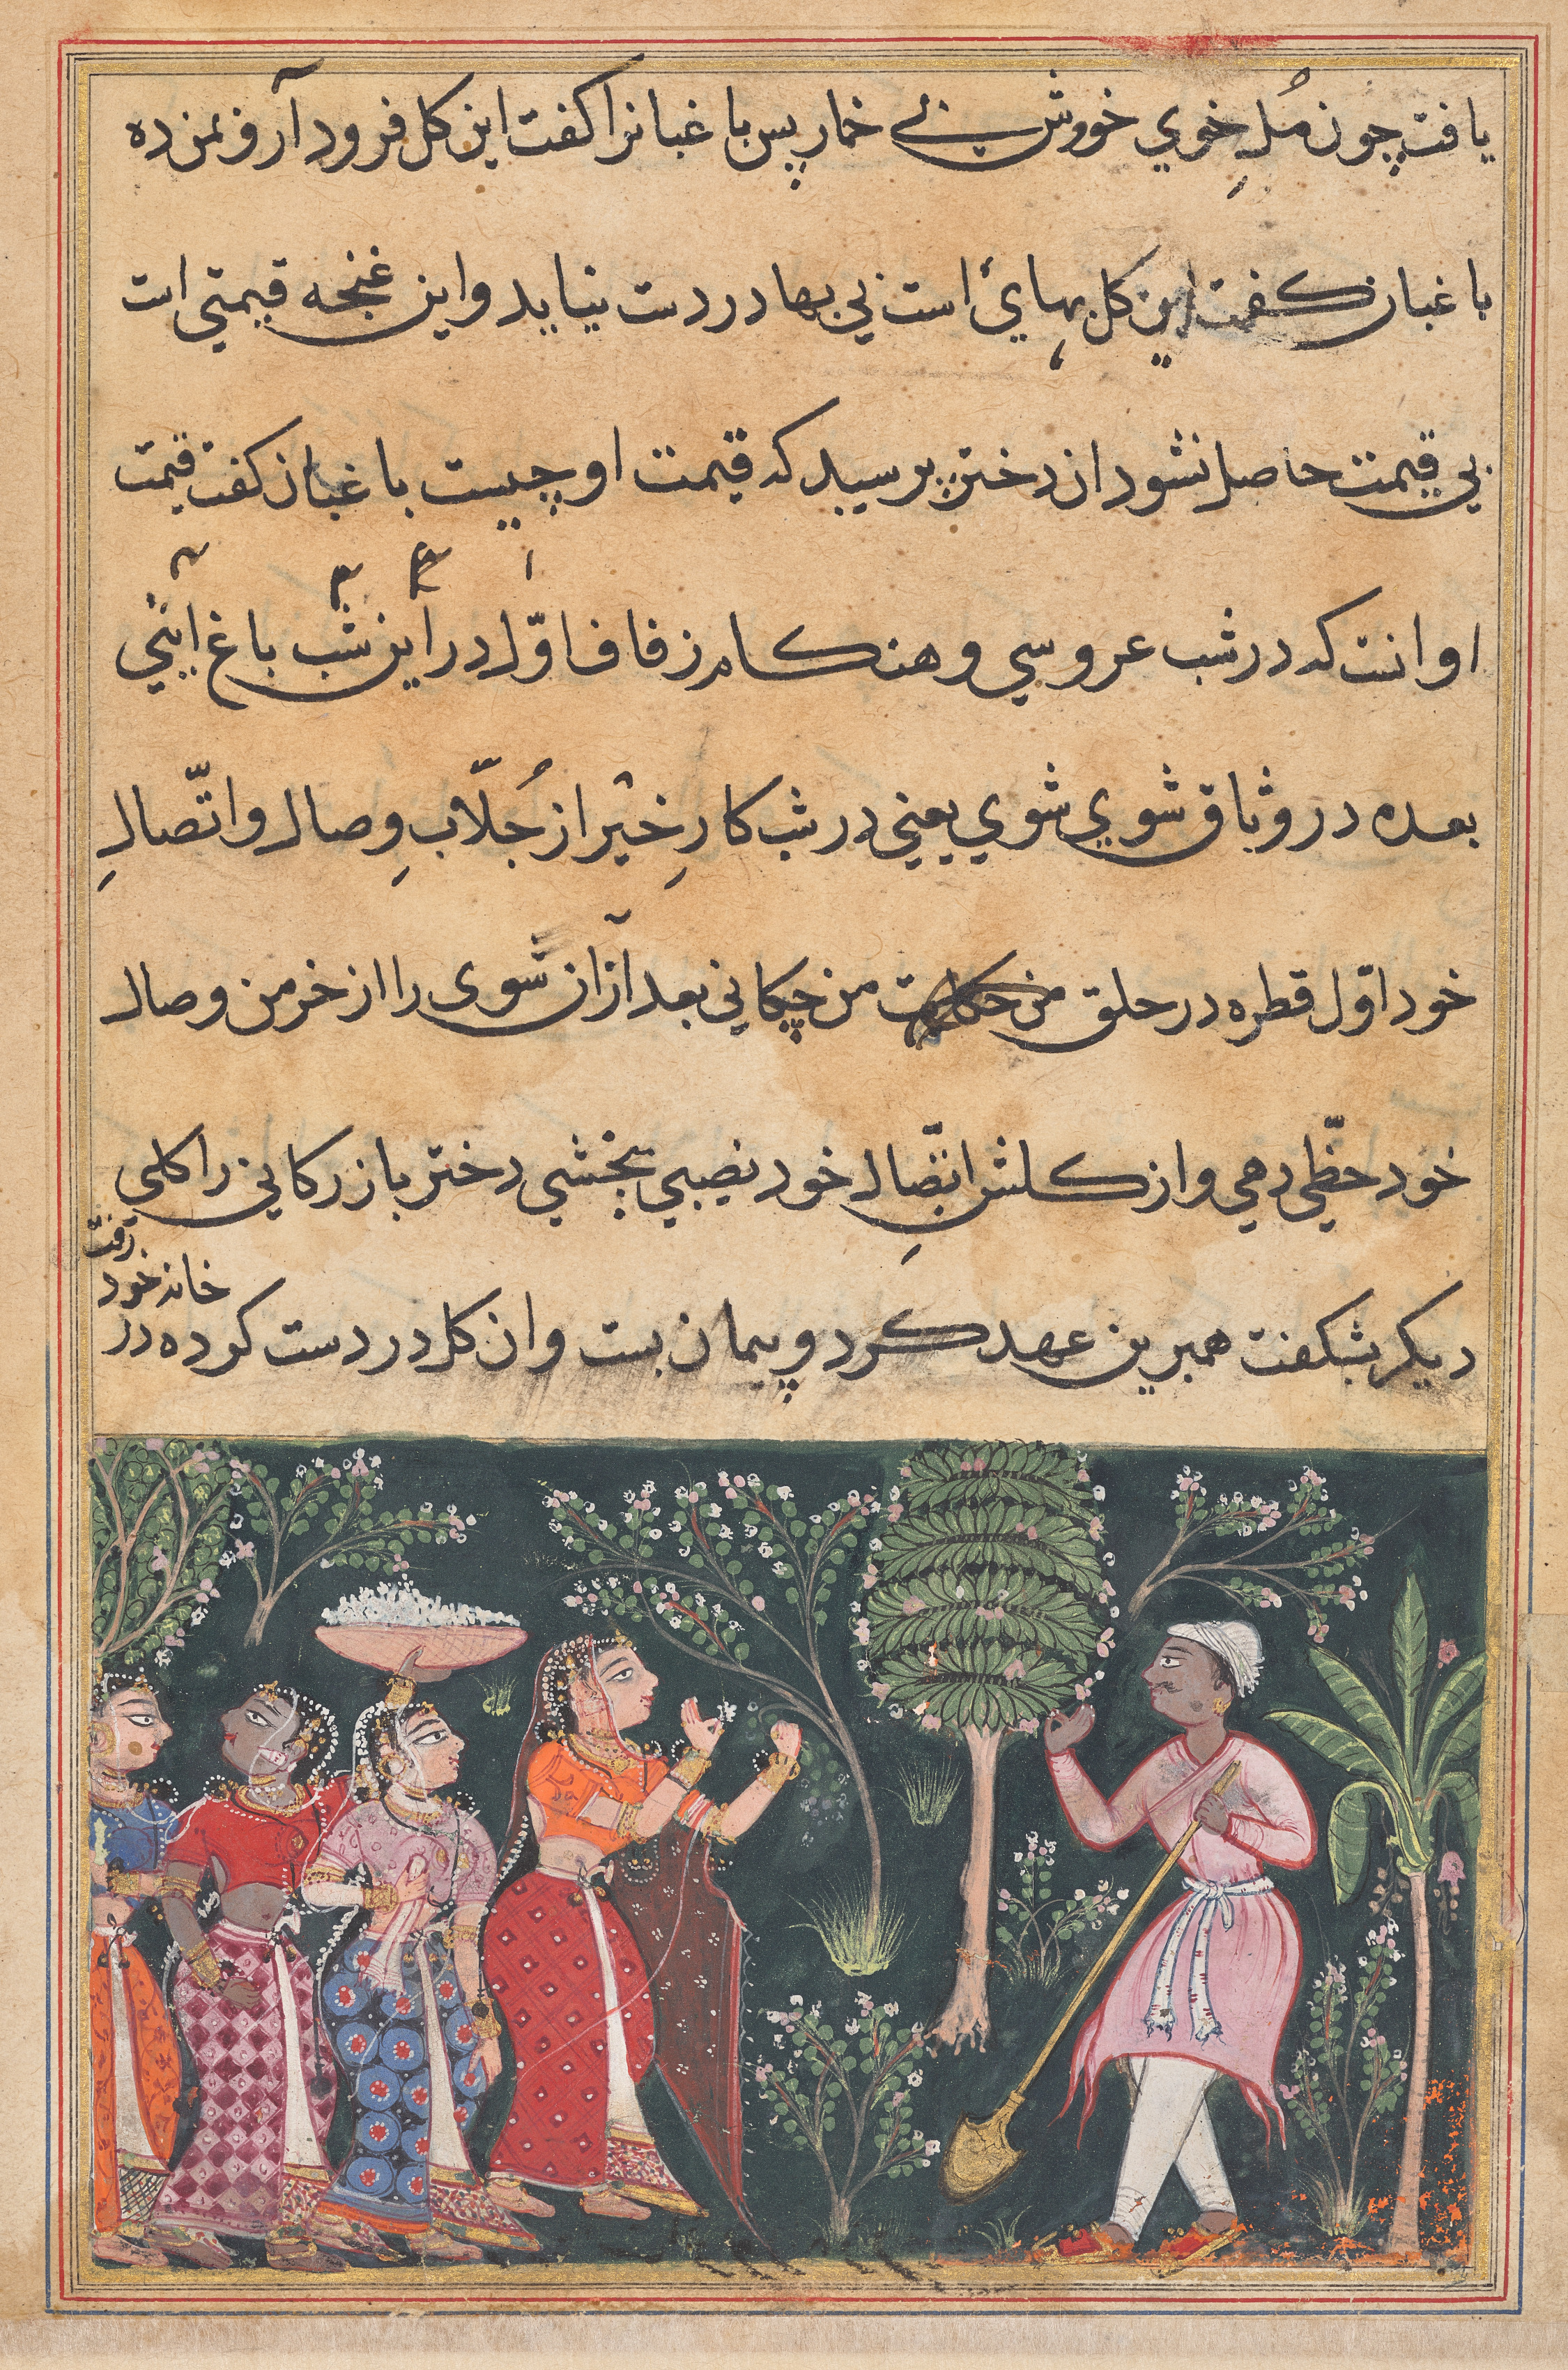 The daughter of the merchant of Mazanderan asks the gardener for the rose, from a Tuti-nama (Tales of a Parrot): Twelfth Night